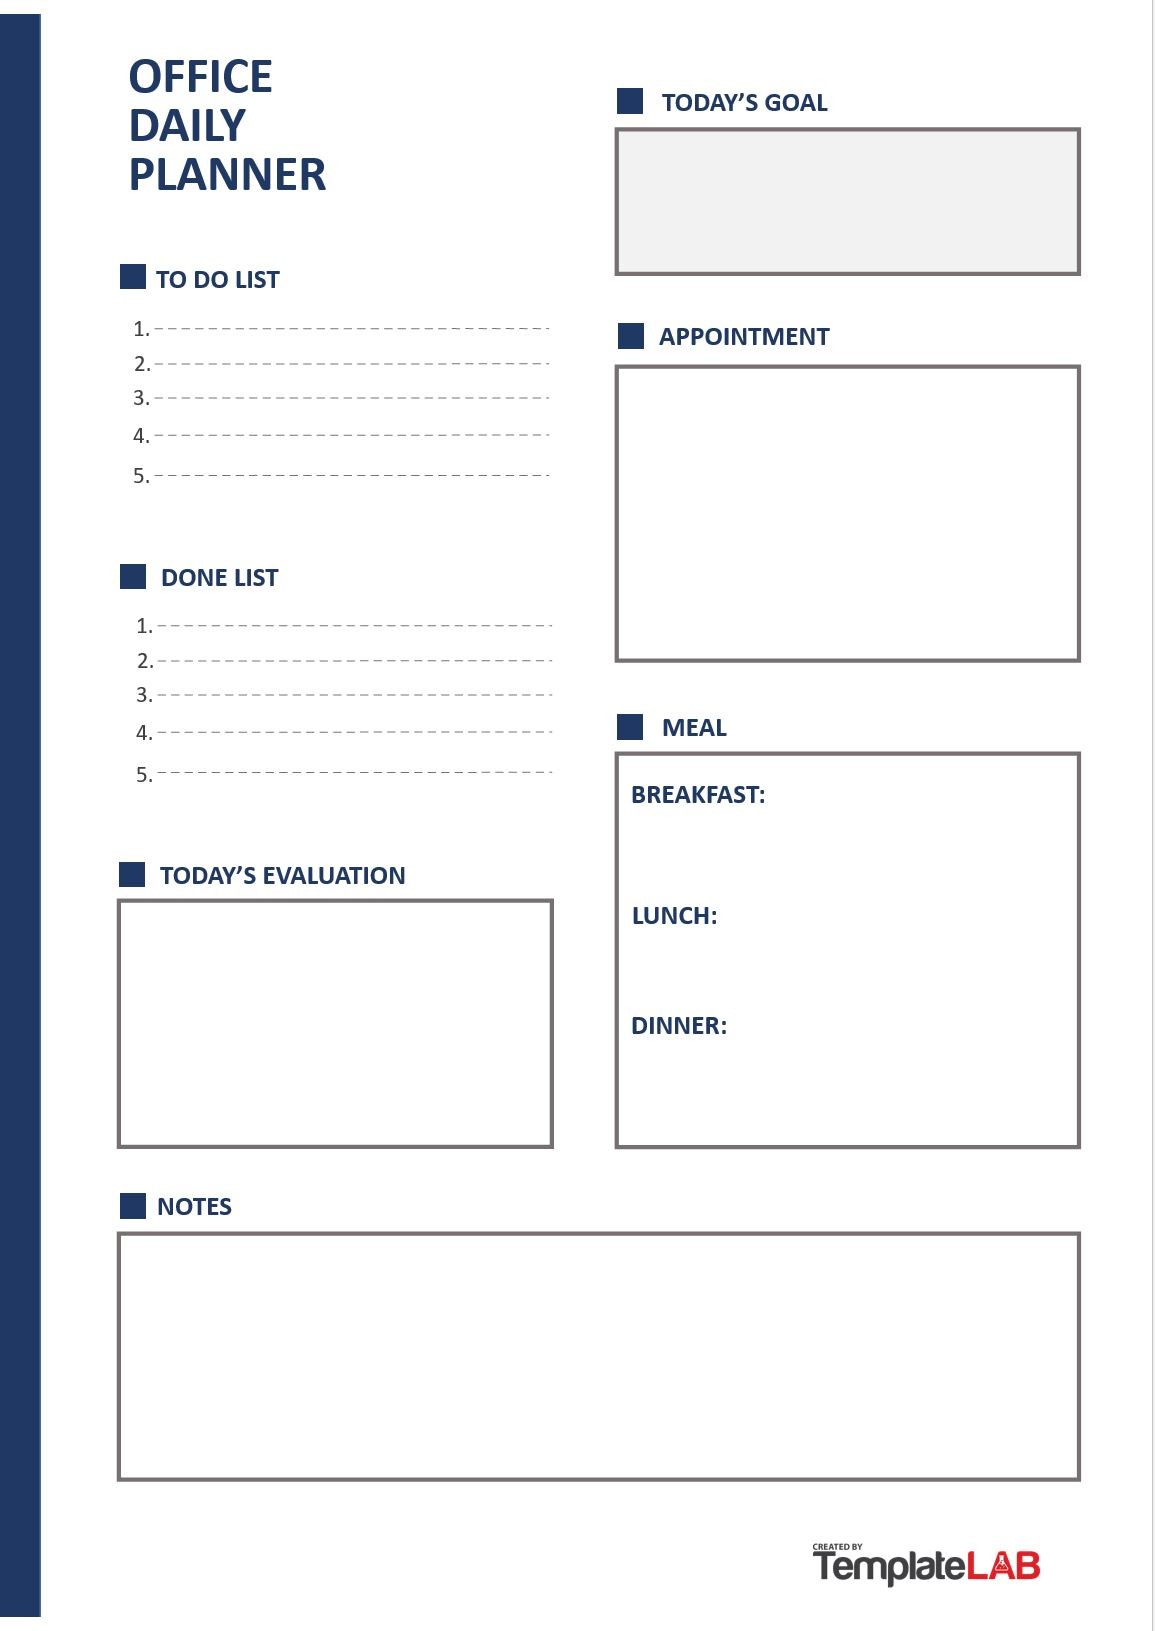 Free Office Daily Planner